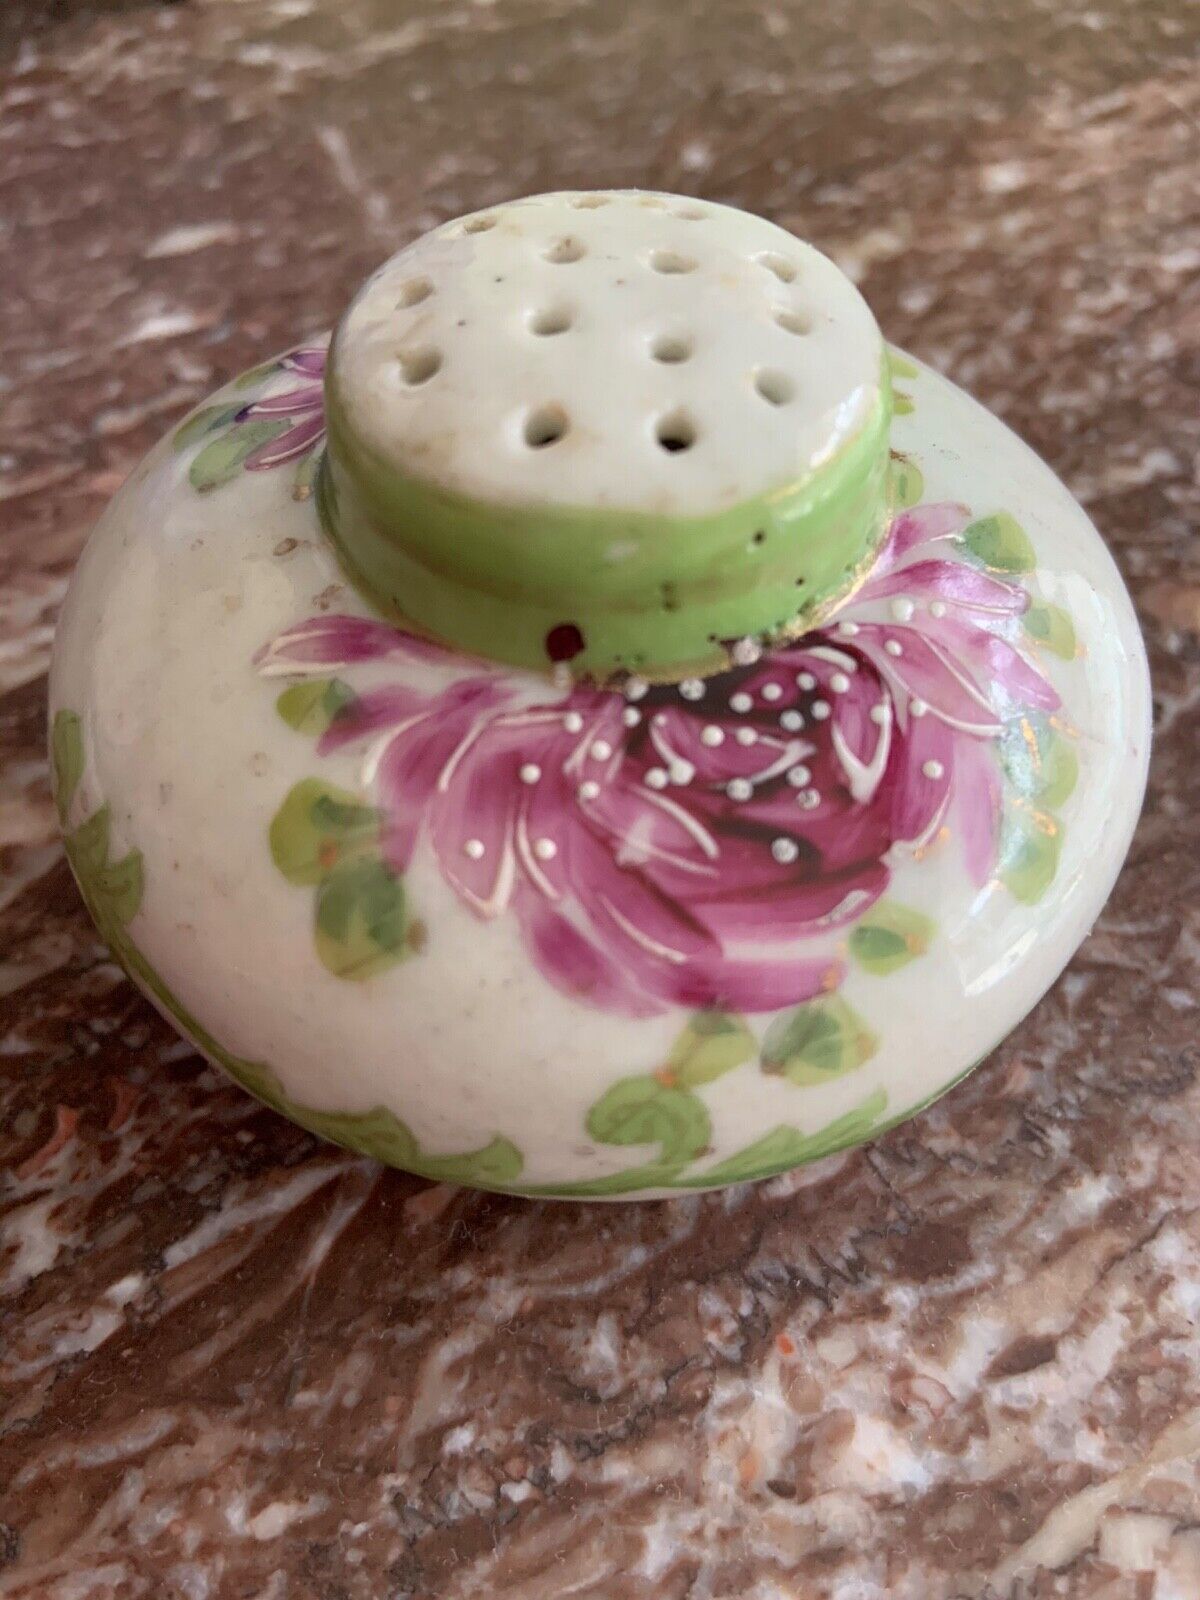 Vintage Salt Shaker, Short and Round, Hand-painted with Fuchsia & Green, Unique